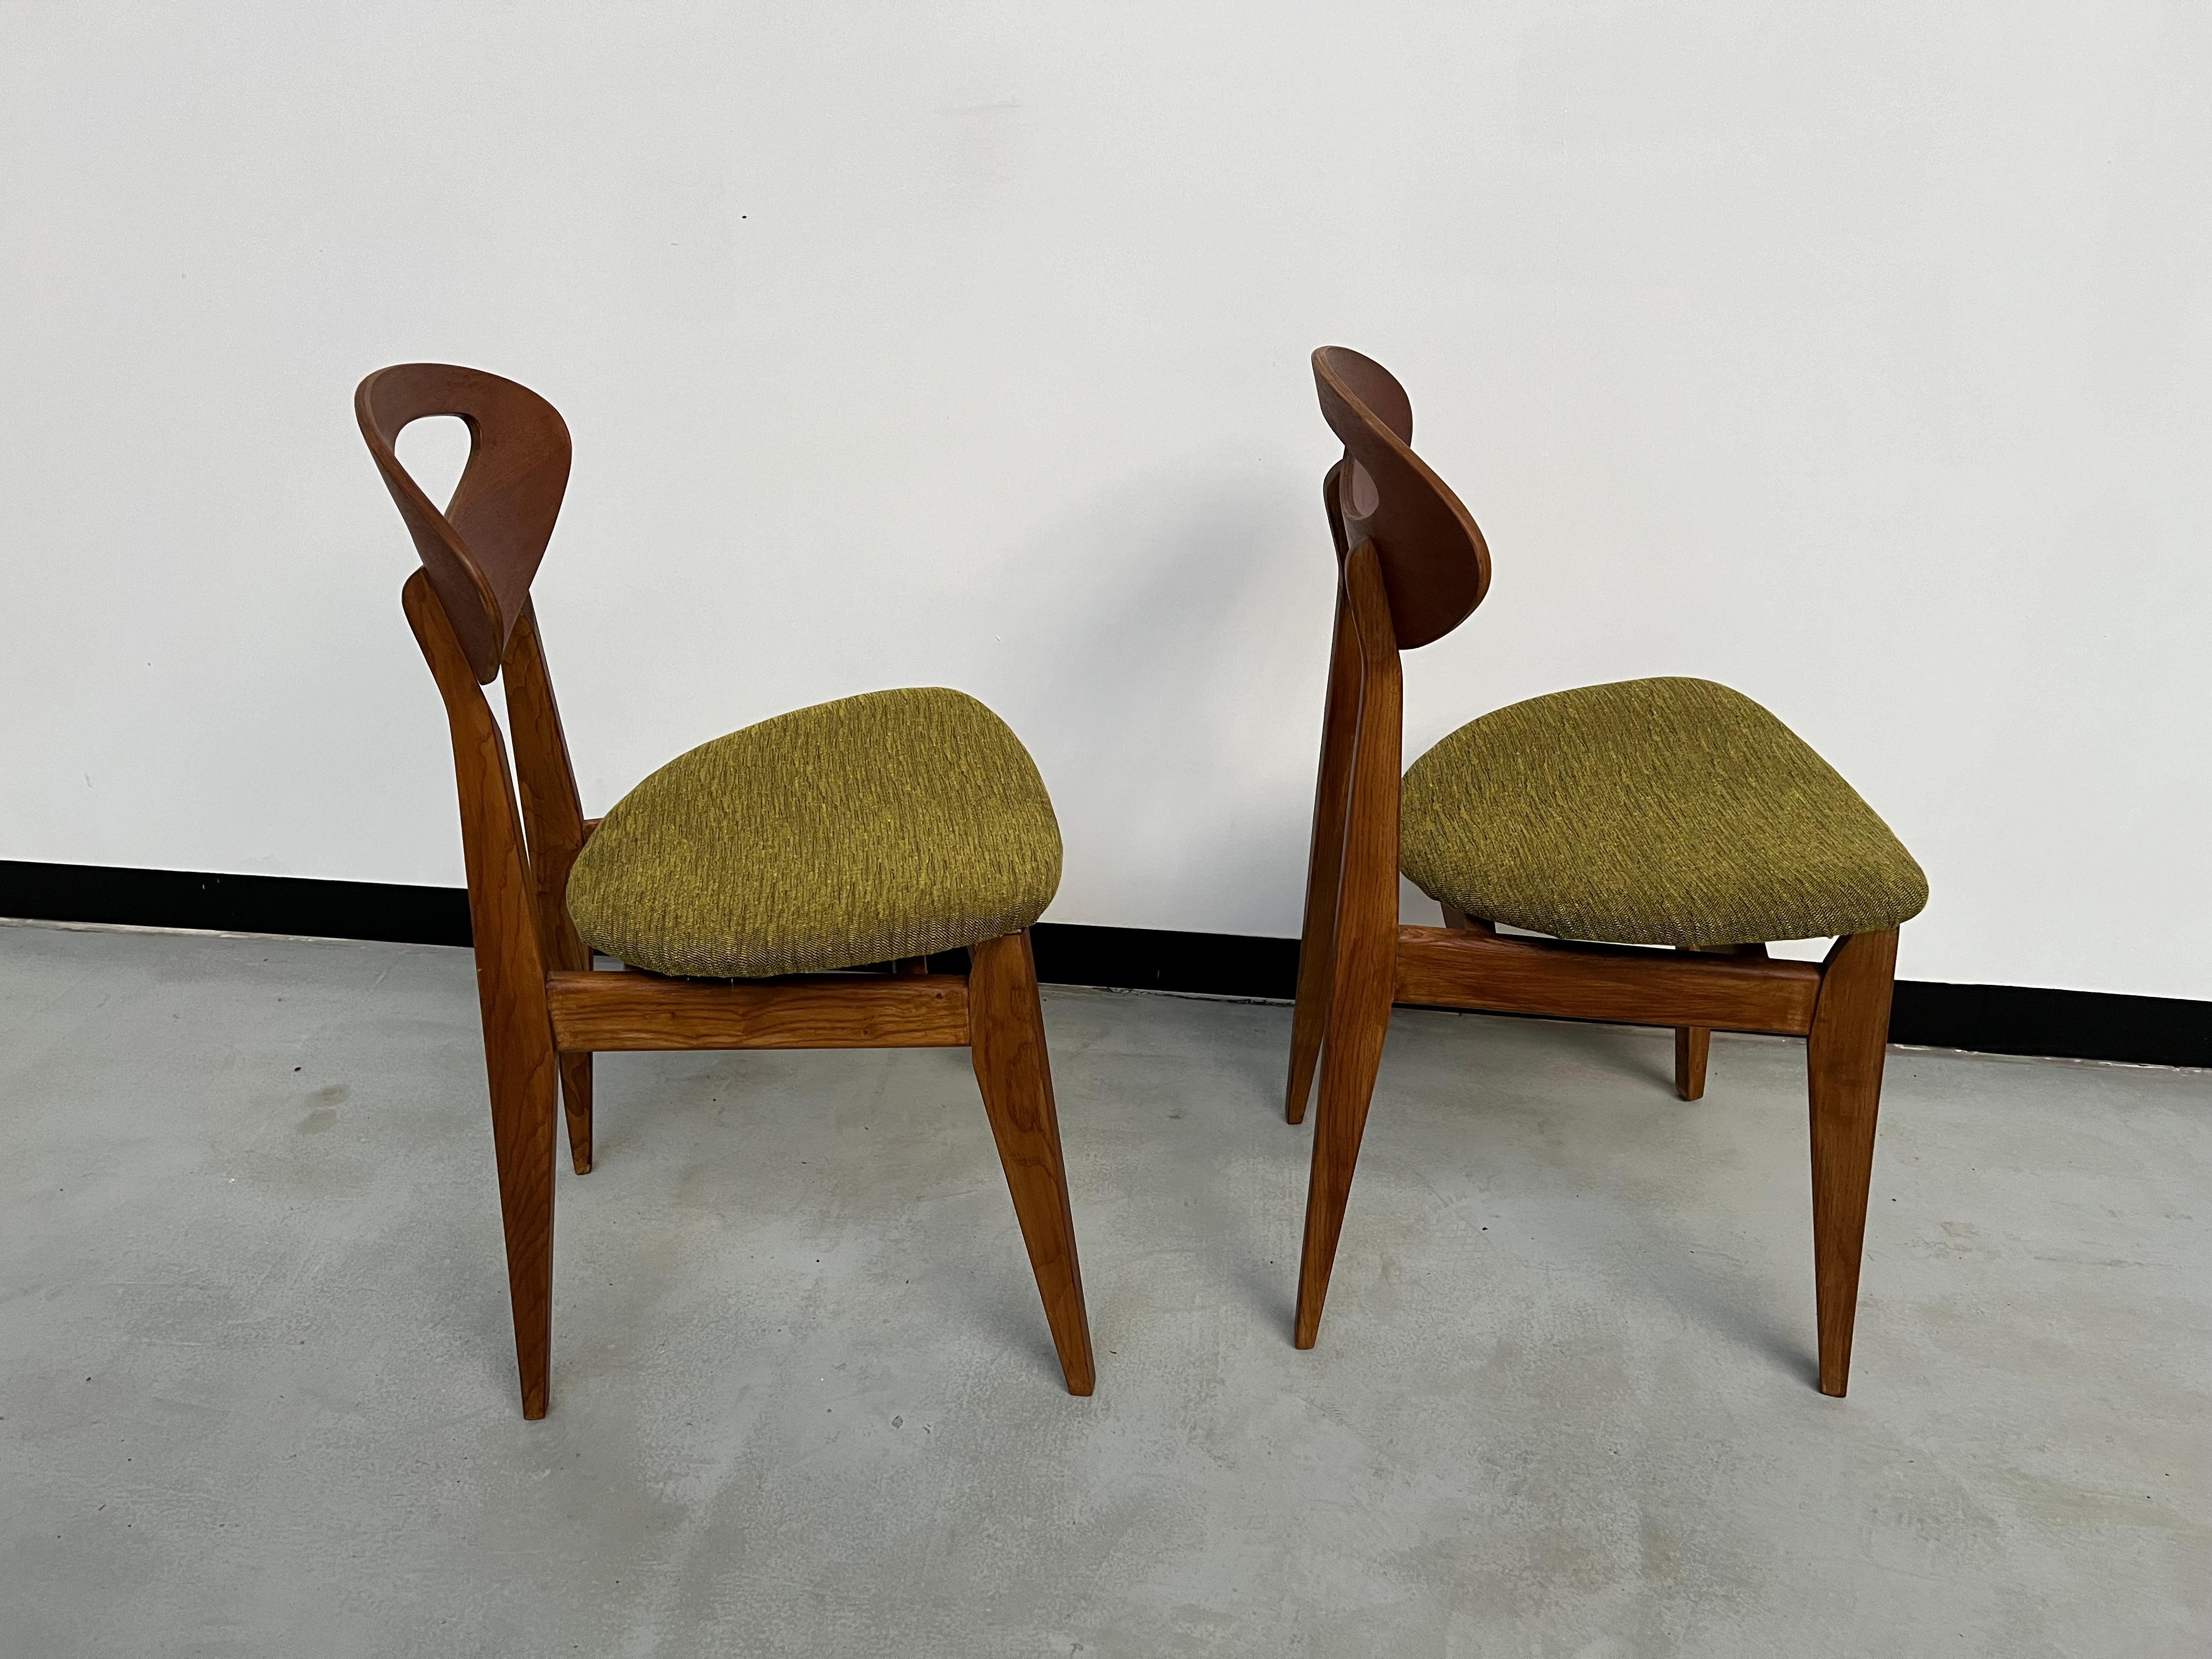  Duo of Roger Landault chairs for Sentou, France 50's 1